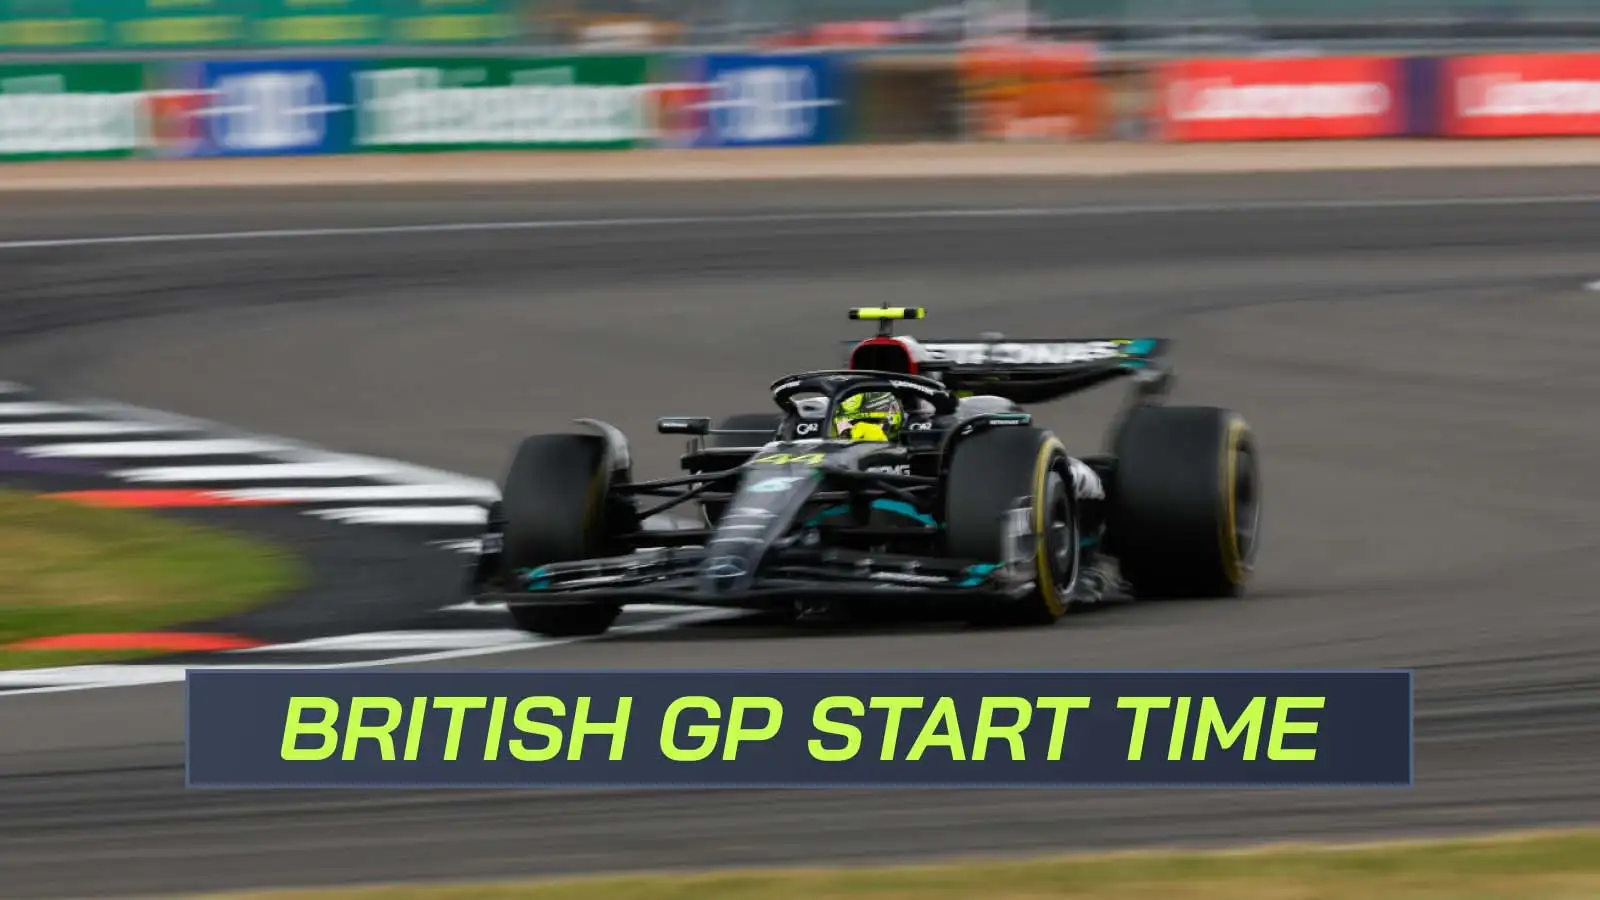 F1 start time: What time does the British GP start? How to watch and live stream